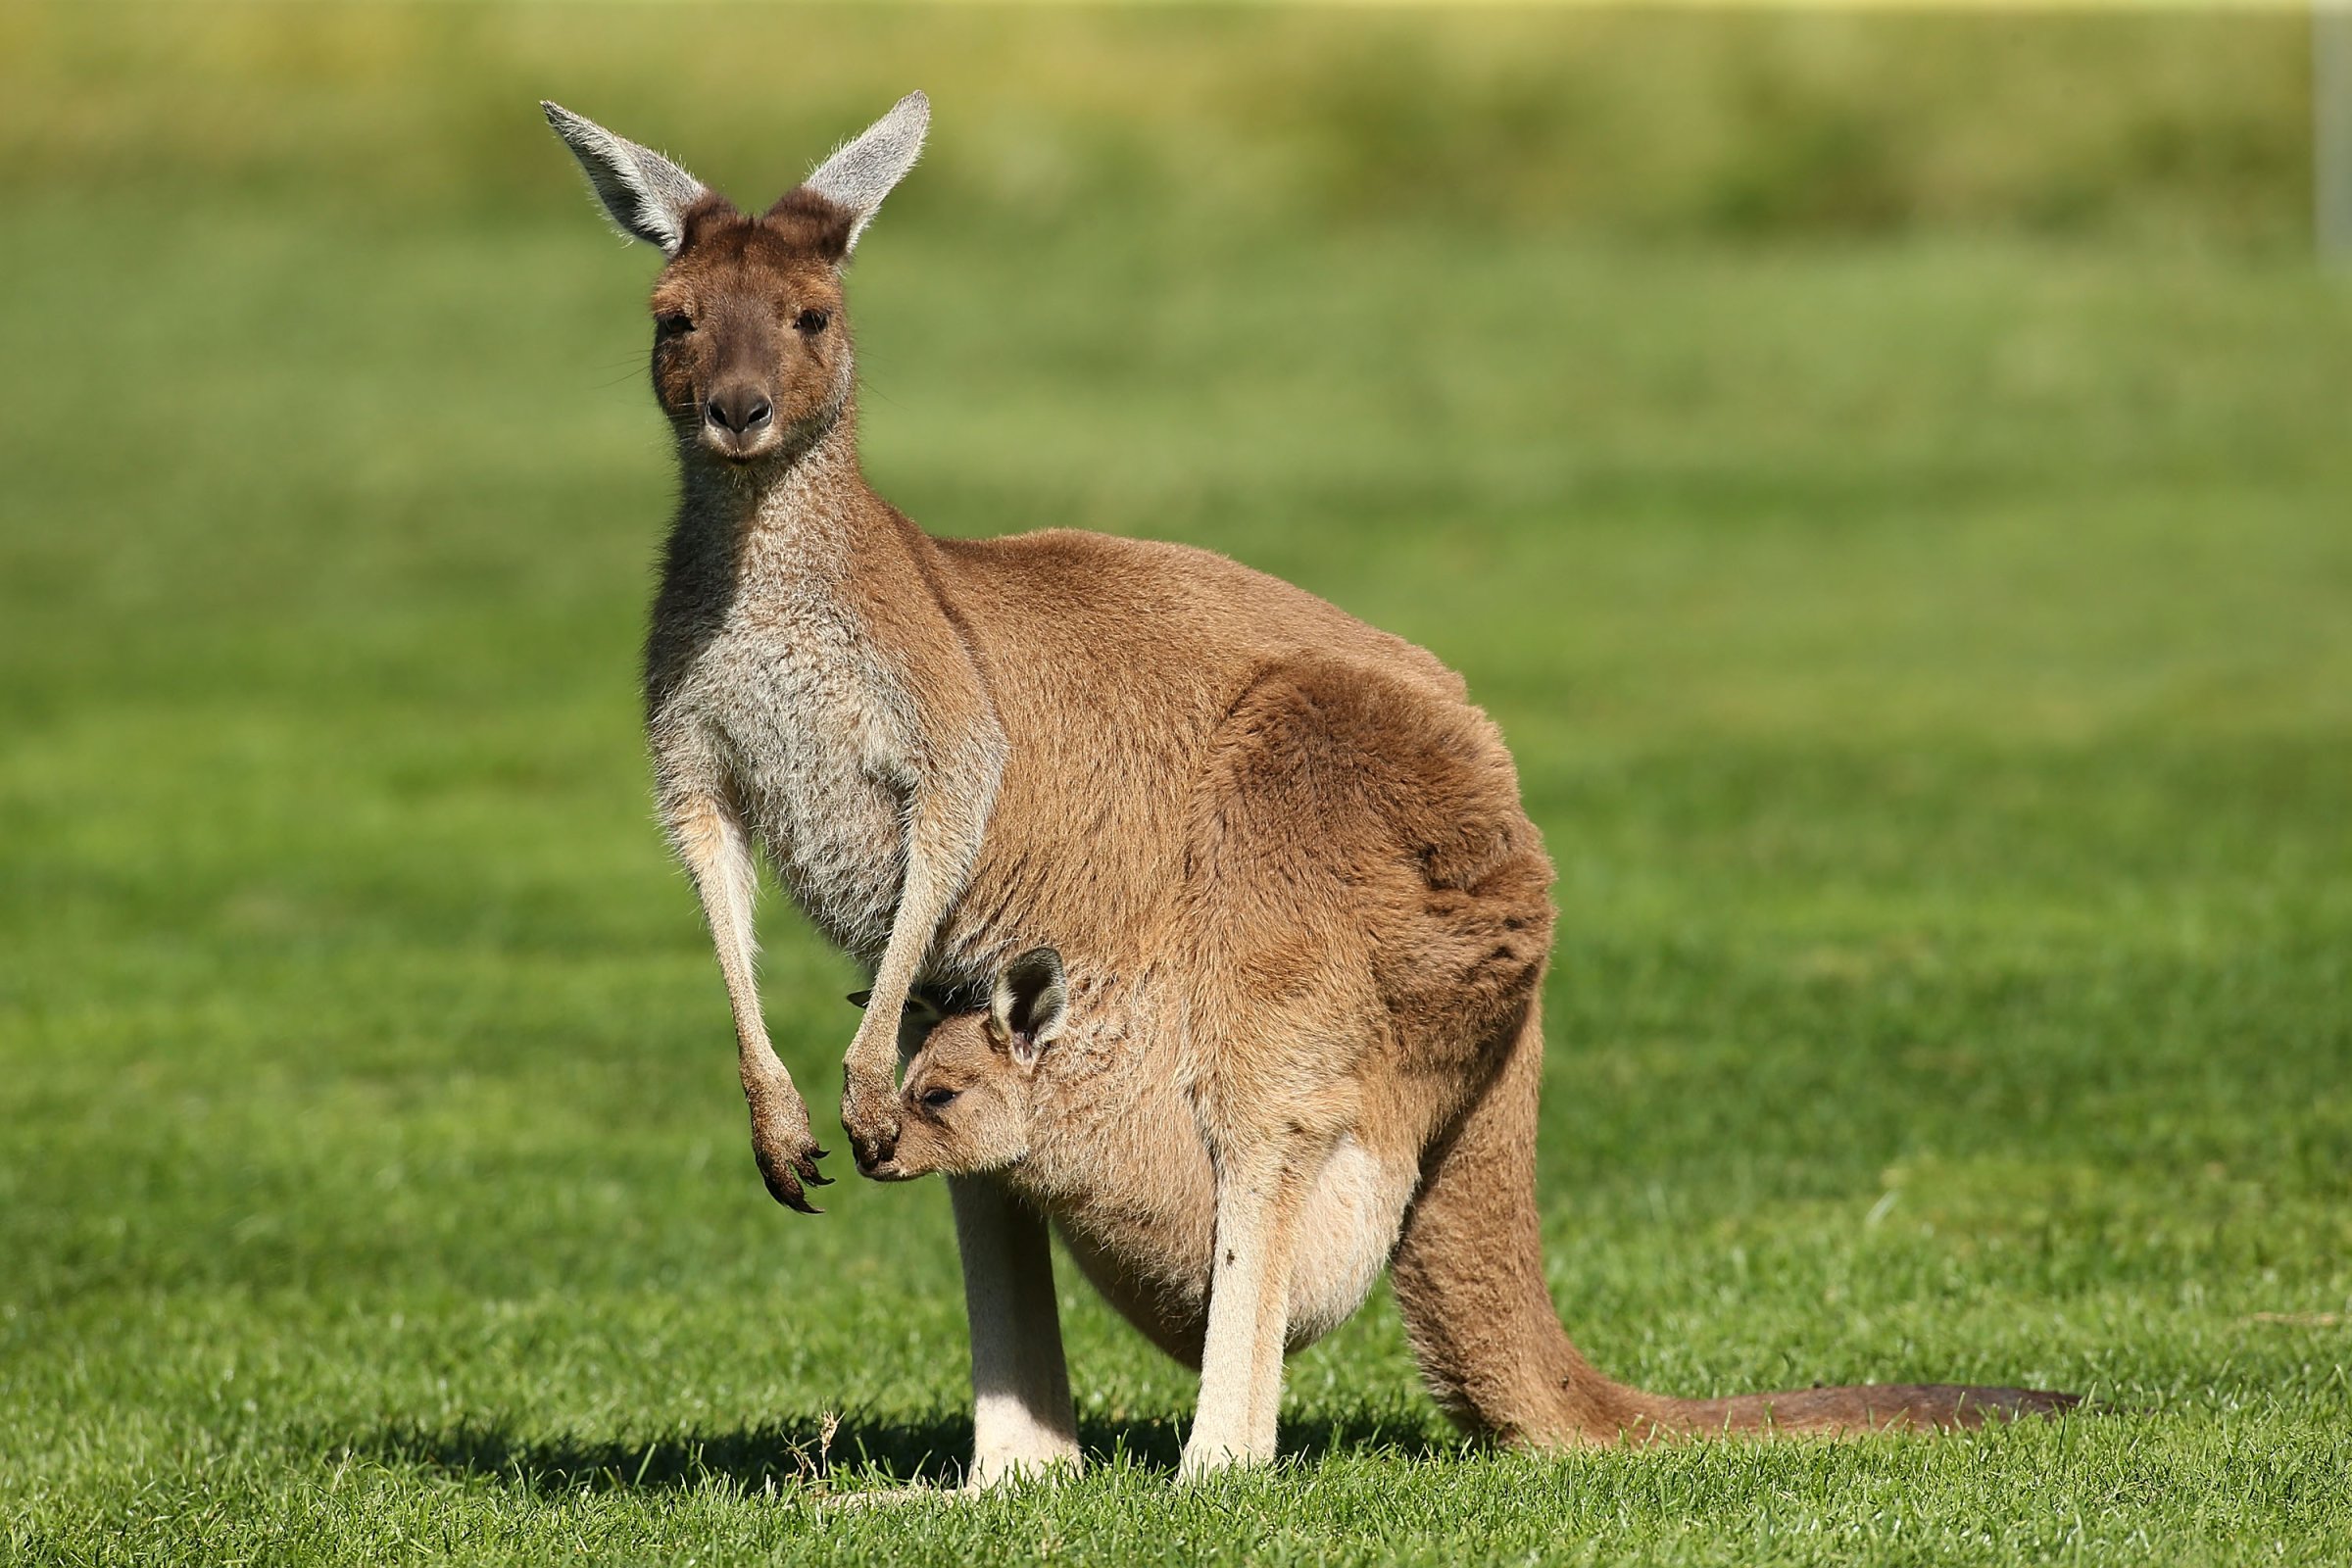 A kangaroo and it's joey sit on the 6th fairway at Lake Karrinyup Country Club on October 17, 2013 in Perth, Australia.